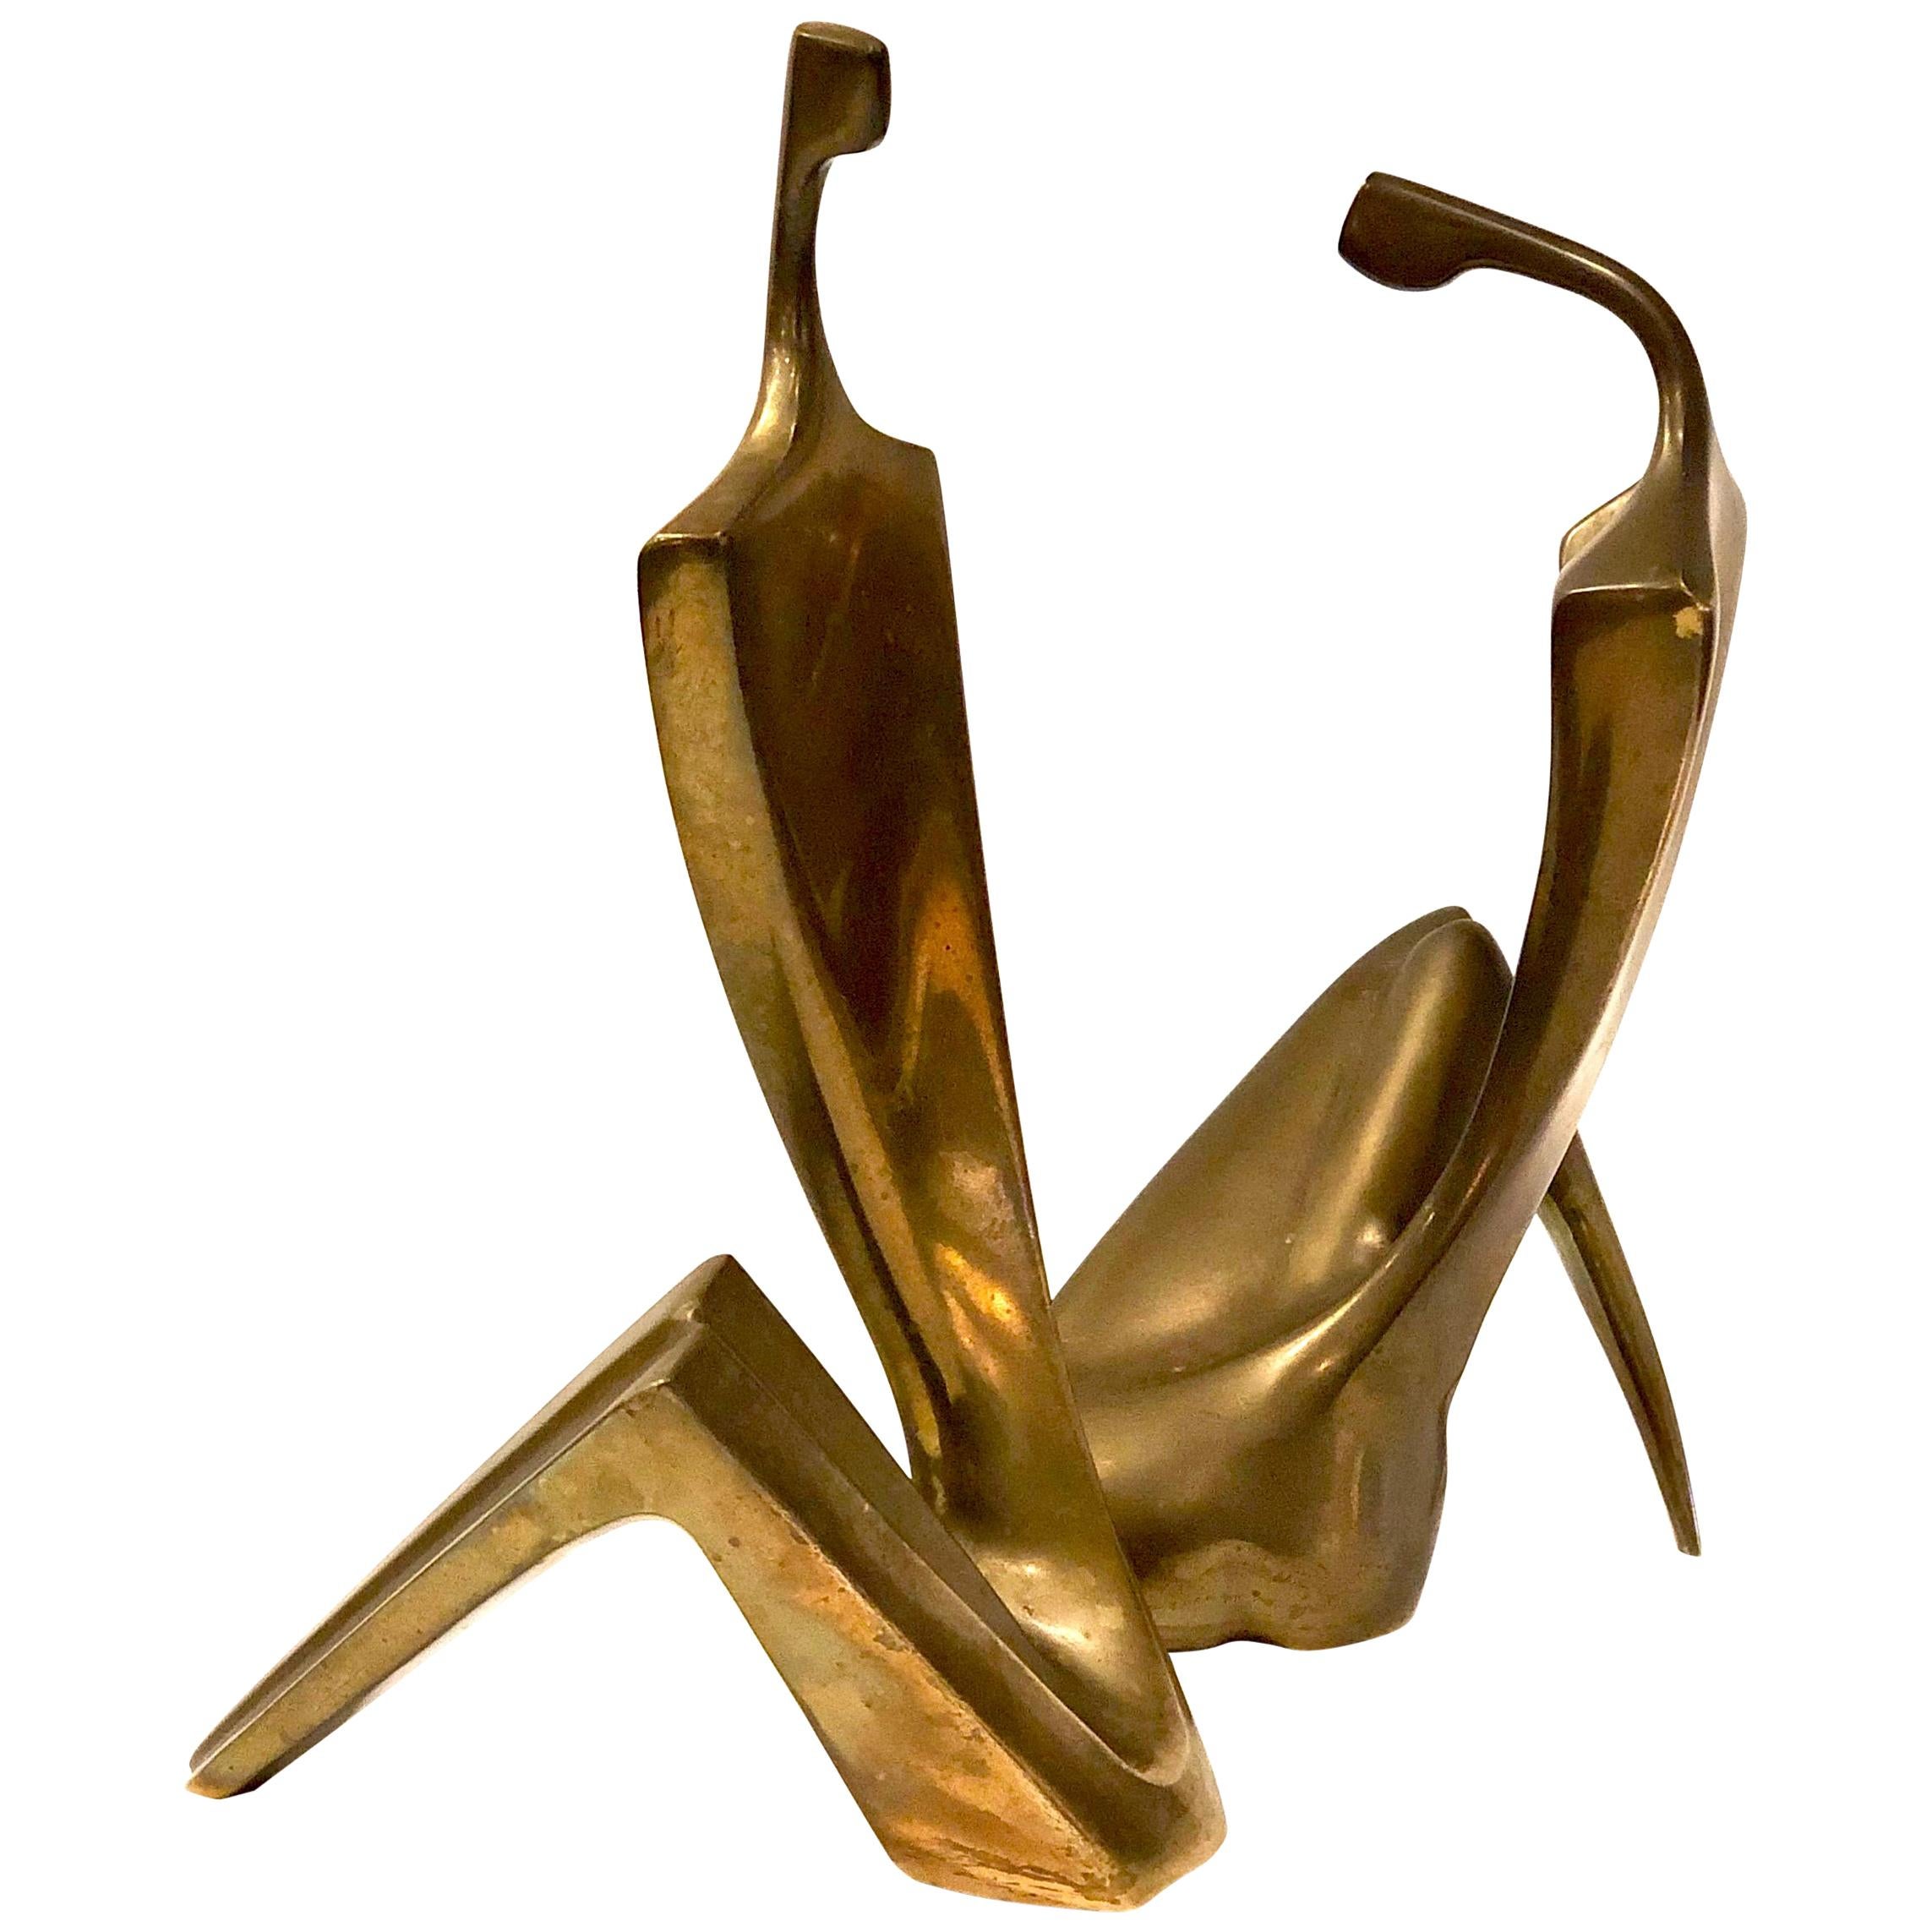 Signed and Numbered Patinated Bronze Sculptures by Itzik Ben Shalom